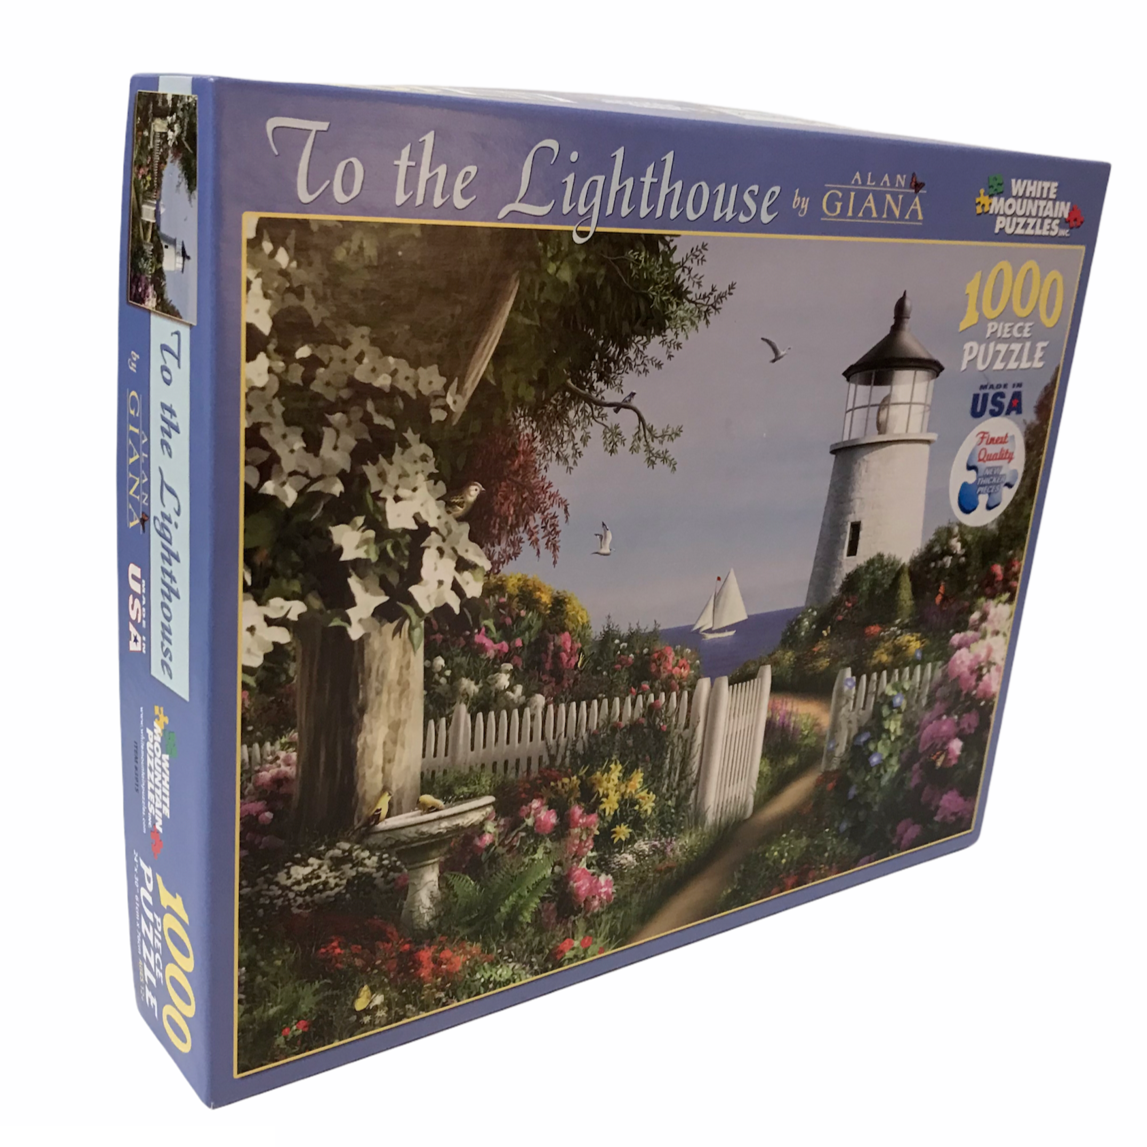 White Mountain Puzzle To The Lighthouse 1000 Piece By Artist Alan Giana Nice - $18.94